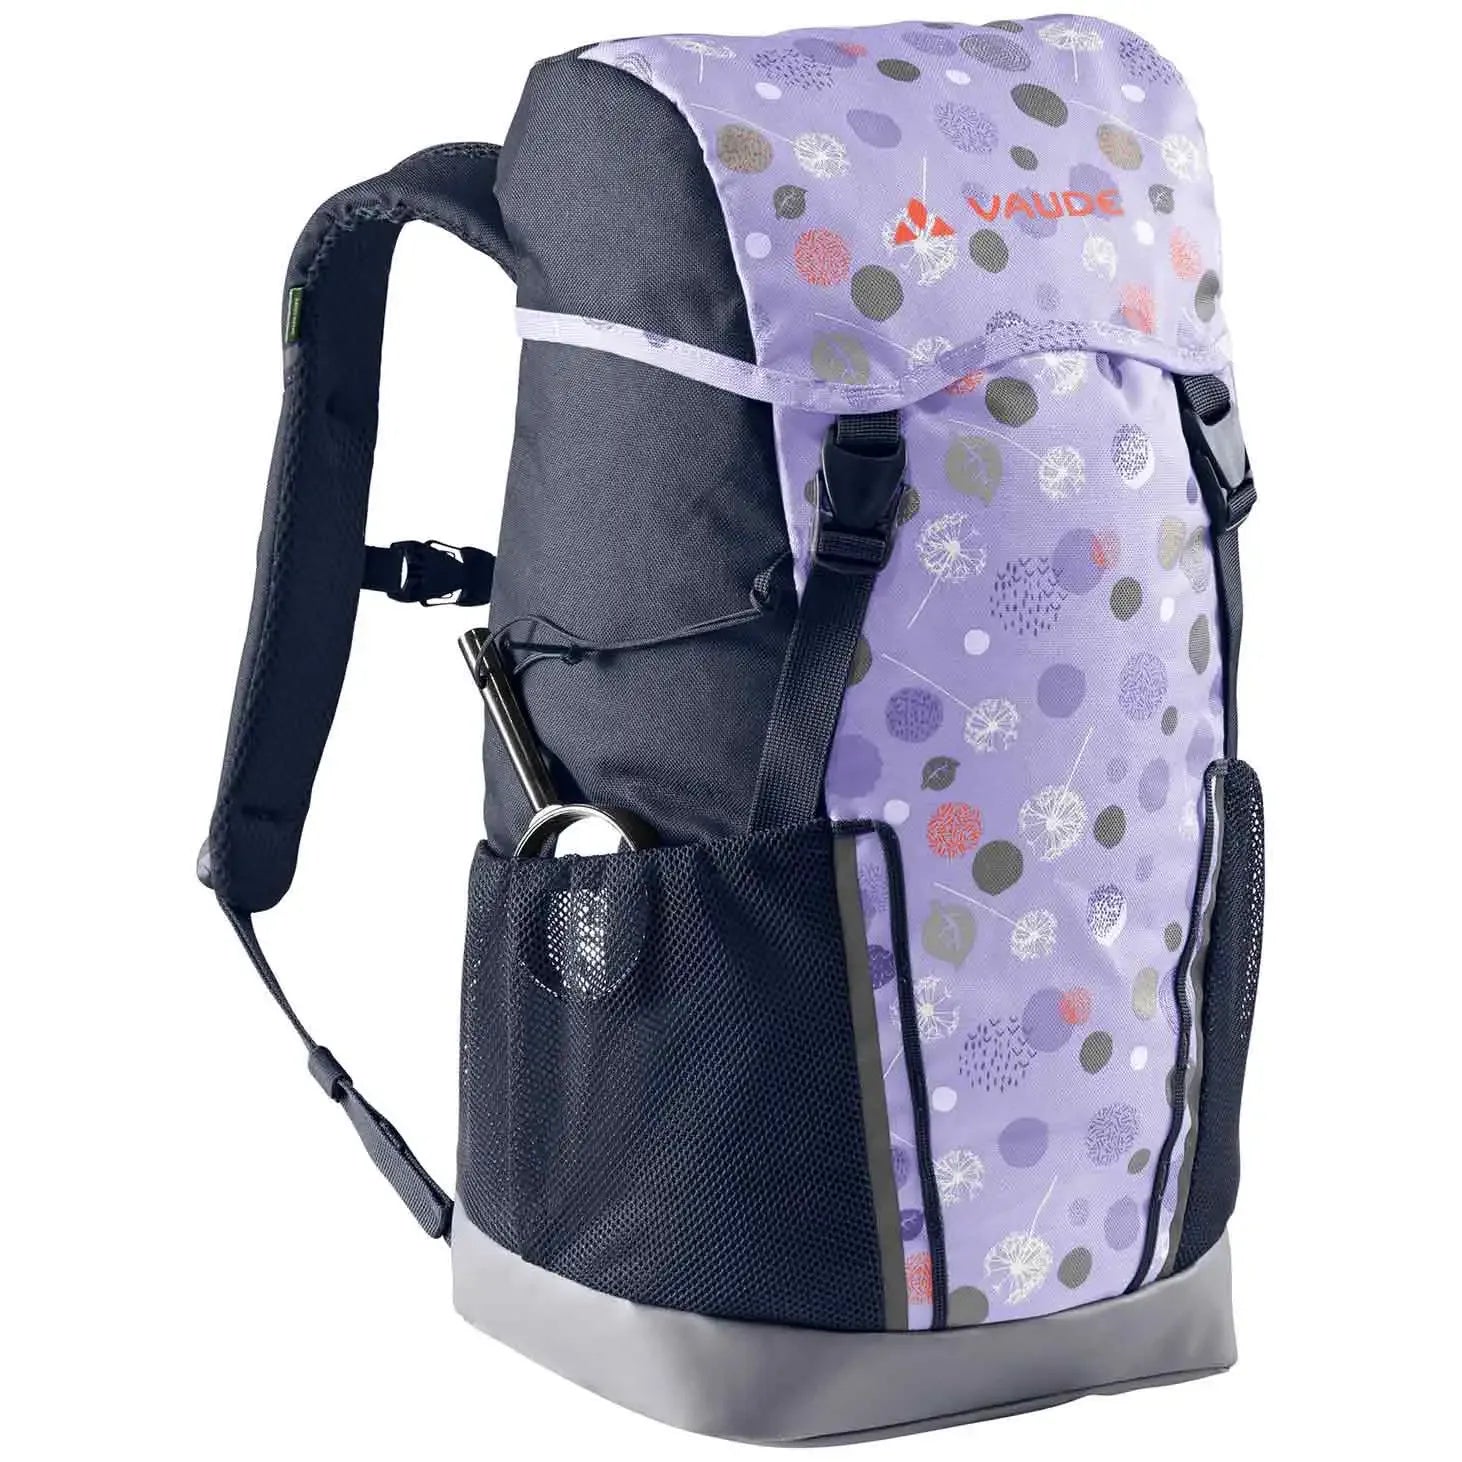 Vaude Family Puck 14 children's backpack 44 cm - pastel lilac